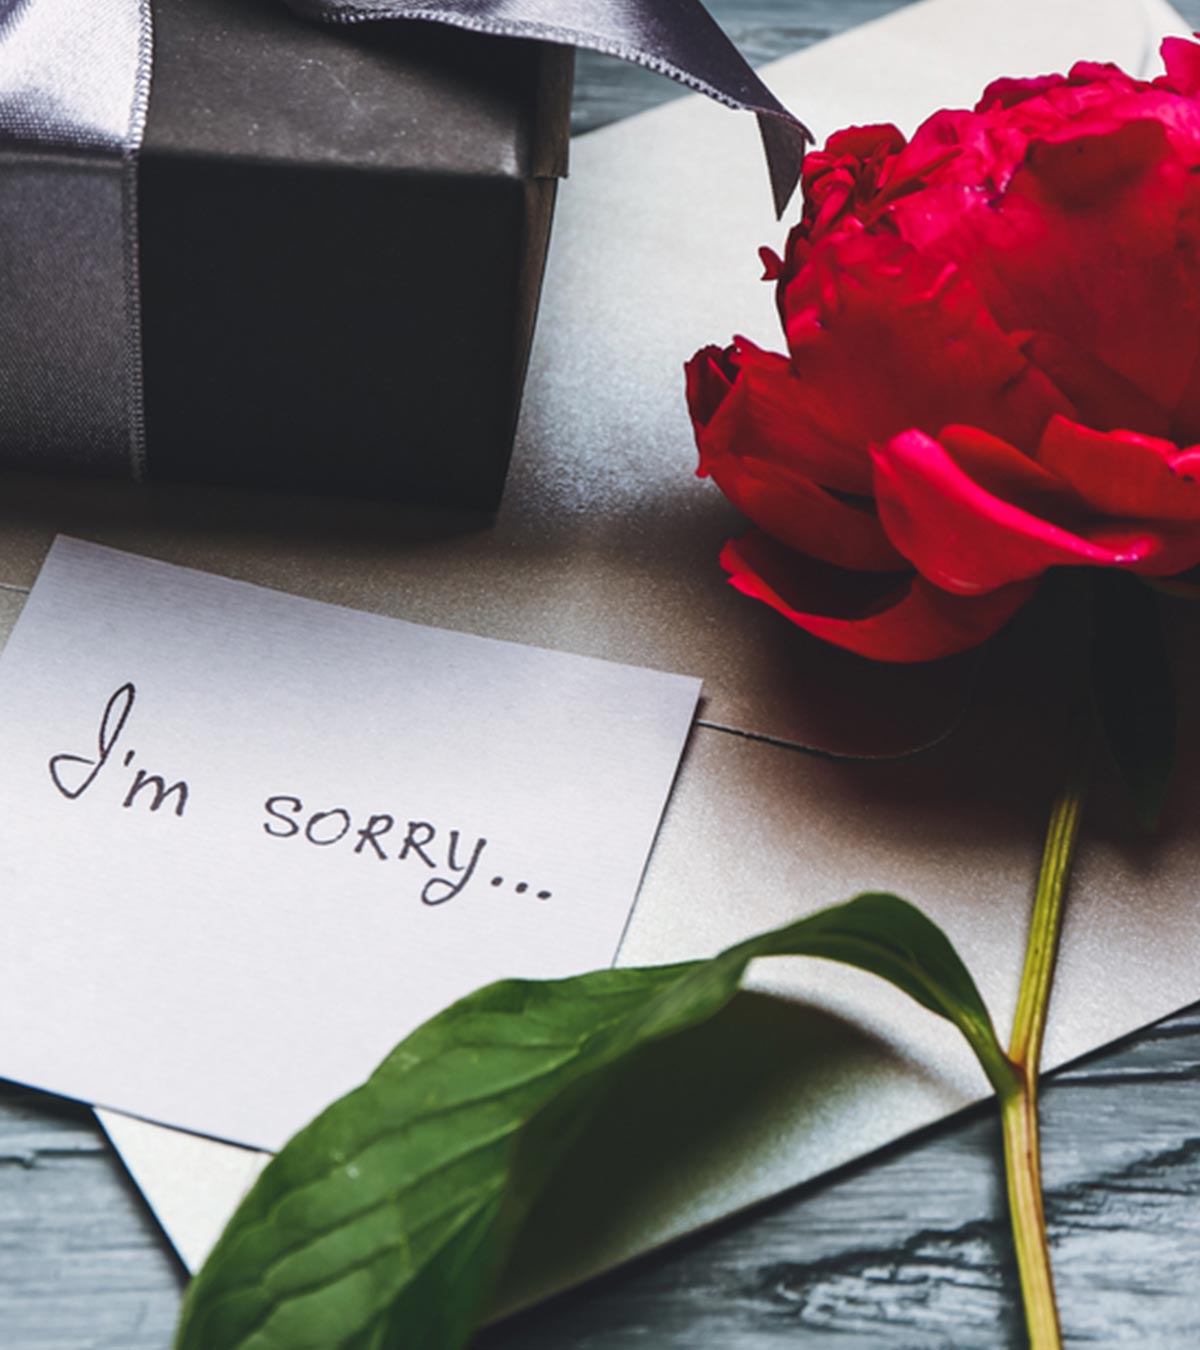 21 Apology Letters To Boyfriend | Sorry Letters For Him